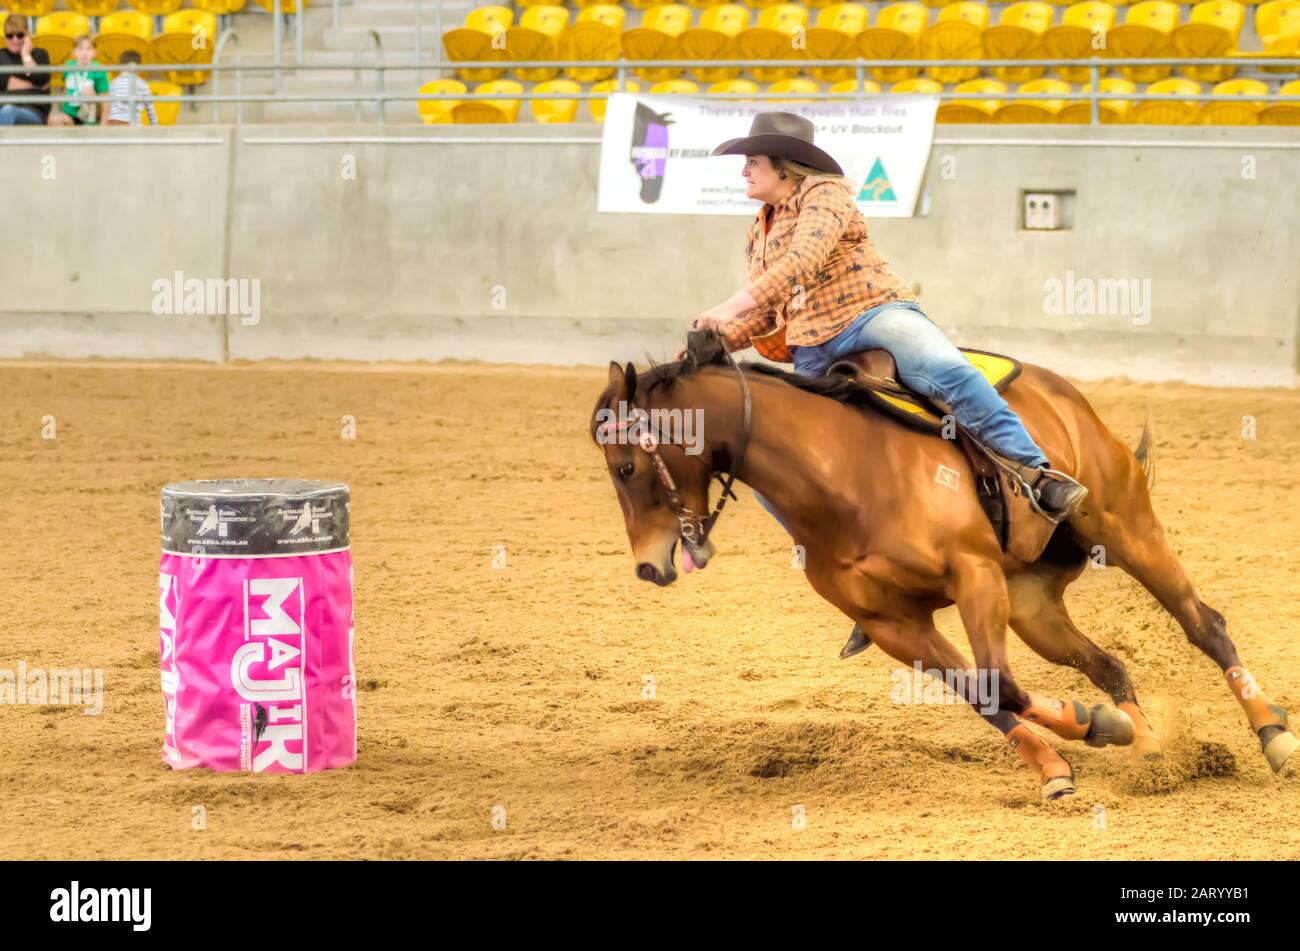 Lady competing in a barrel race at an indoor arena at Tamworth Australia. Stock Photo